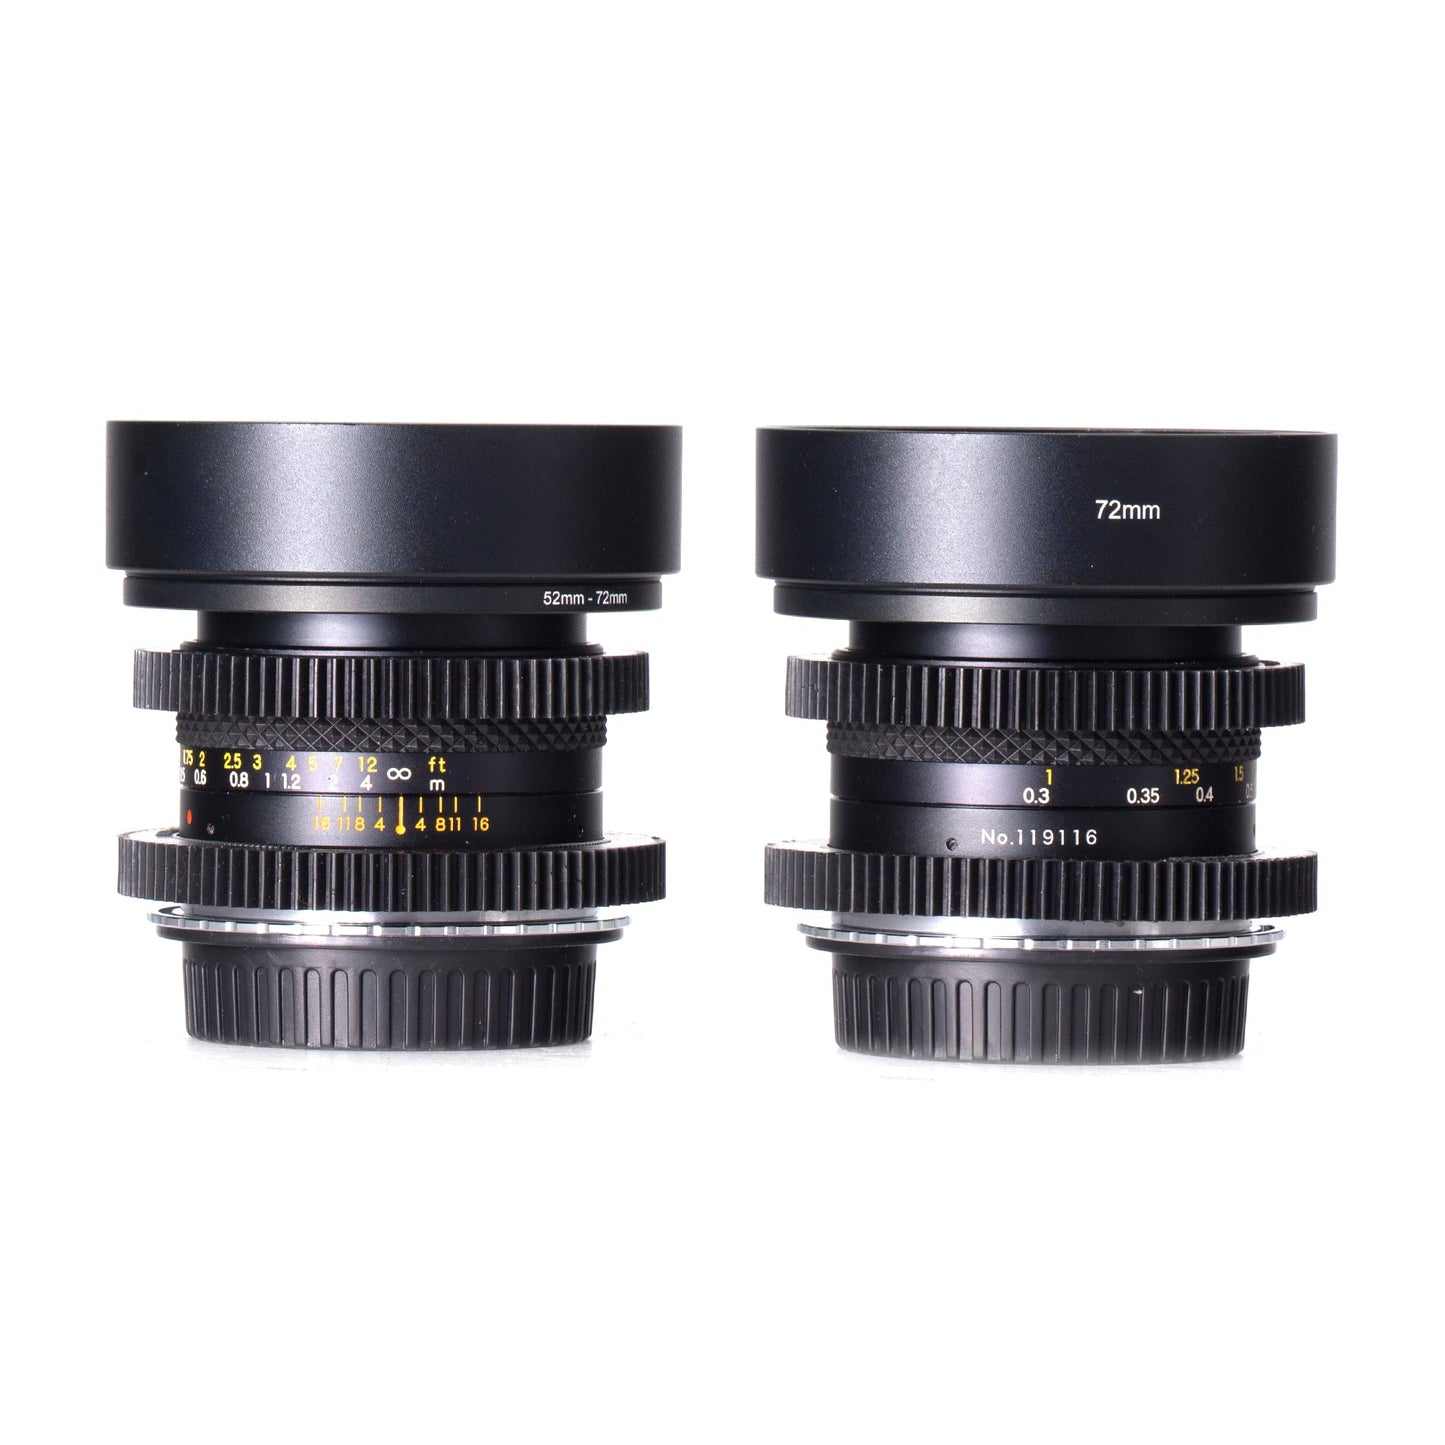 Yashica DSB 28mm F2.8 & 55mm F2 Cine Mod Prime Lenses Set For Canon EF! - TerPhoto Store